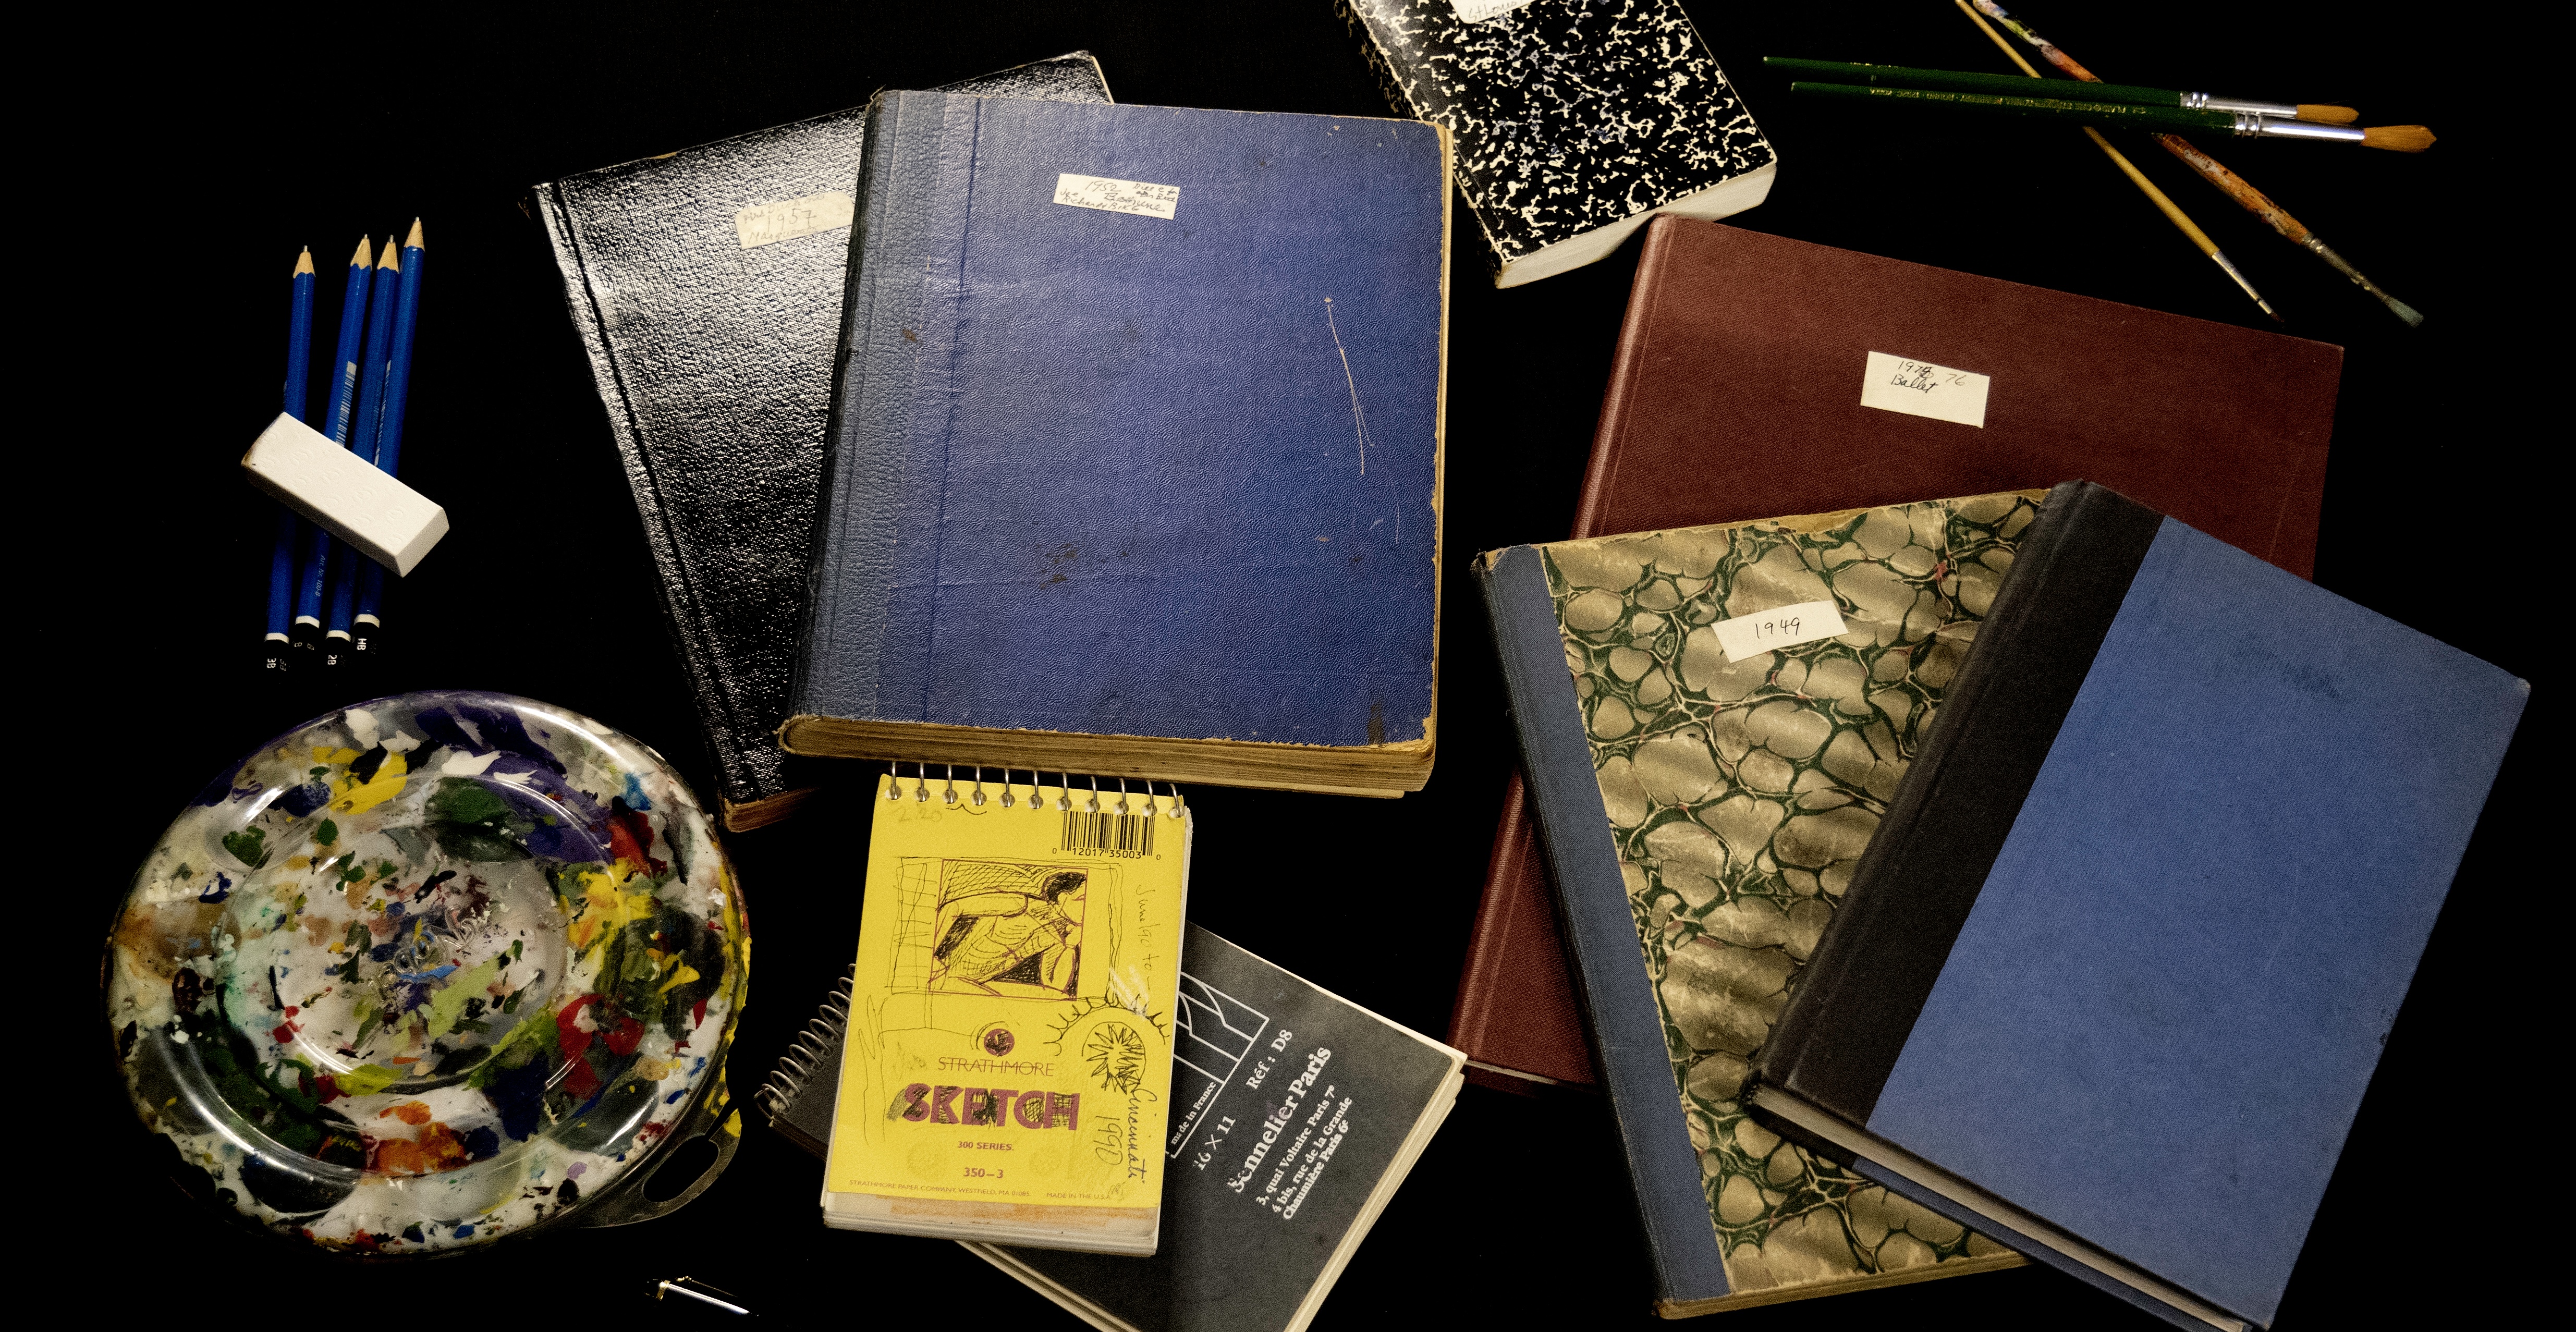 An array of closed sketchbooks in varying sizes and colours, taken from the Rita Brianksy fonds. They are strewed on a black surface along with pencils, brushes, and a painting palette. This is a screenshot from the video about Rita Briansky's sketchbooks.